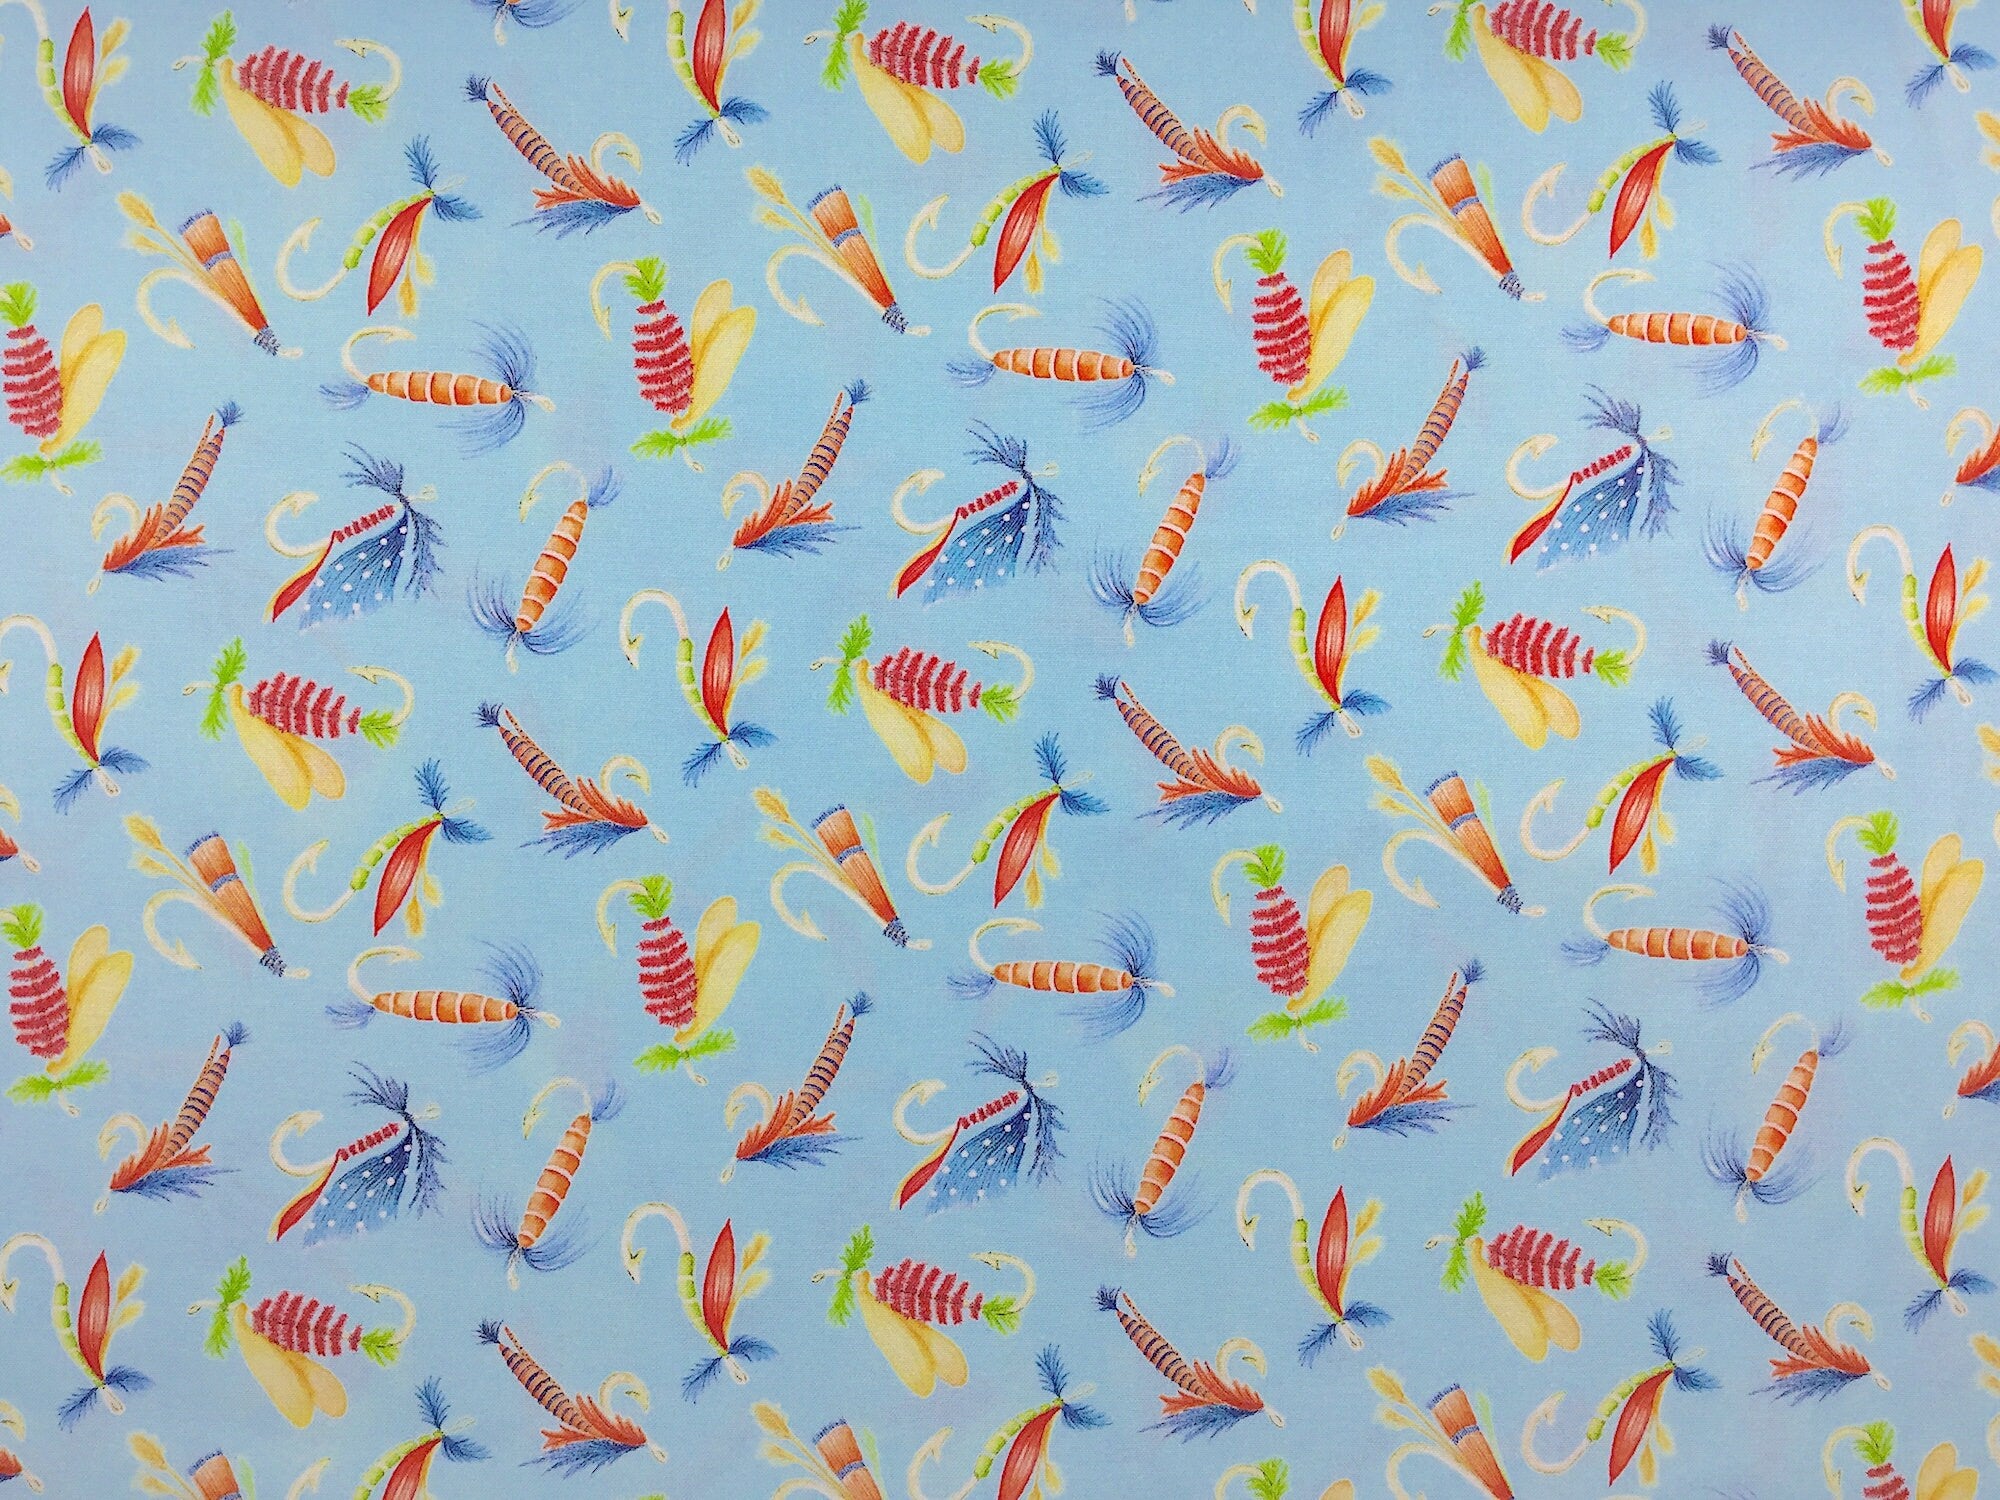 This fabric is covered with fishing lures on a light blue background.